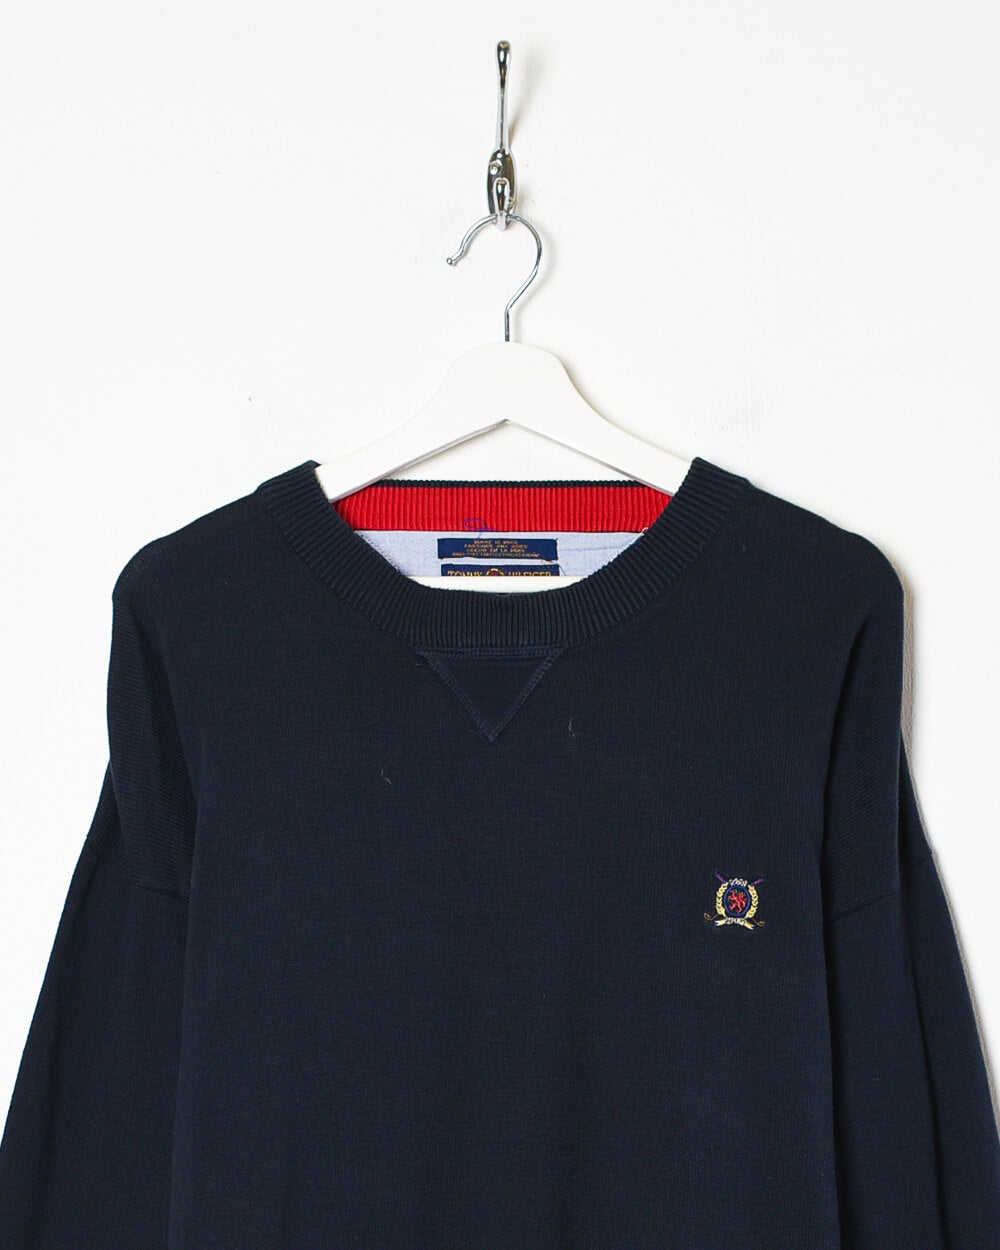 Navy Tommy Hilfiger Knitted Sweatshirt - X-Large